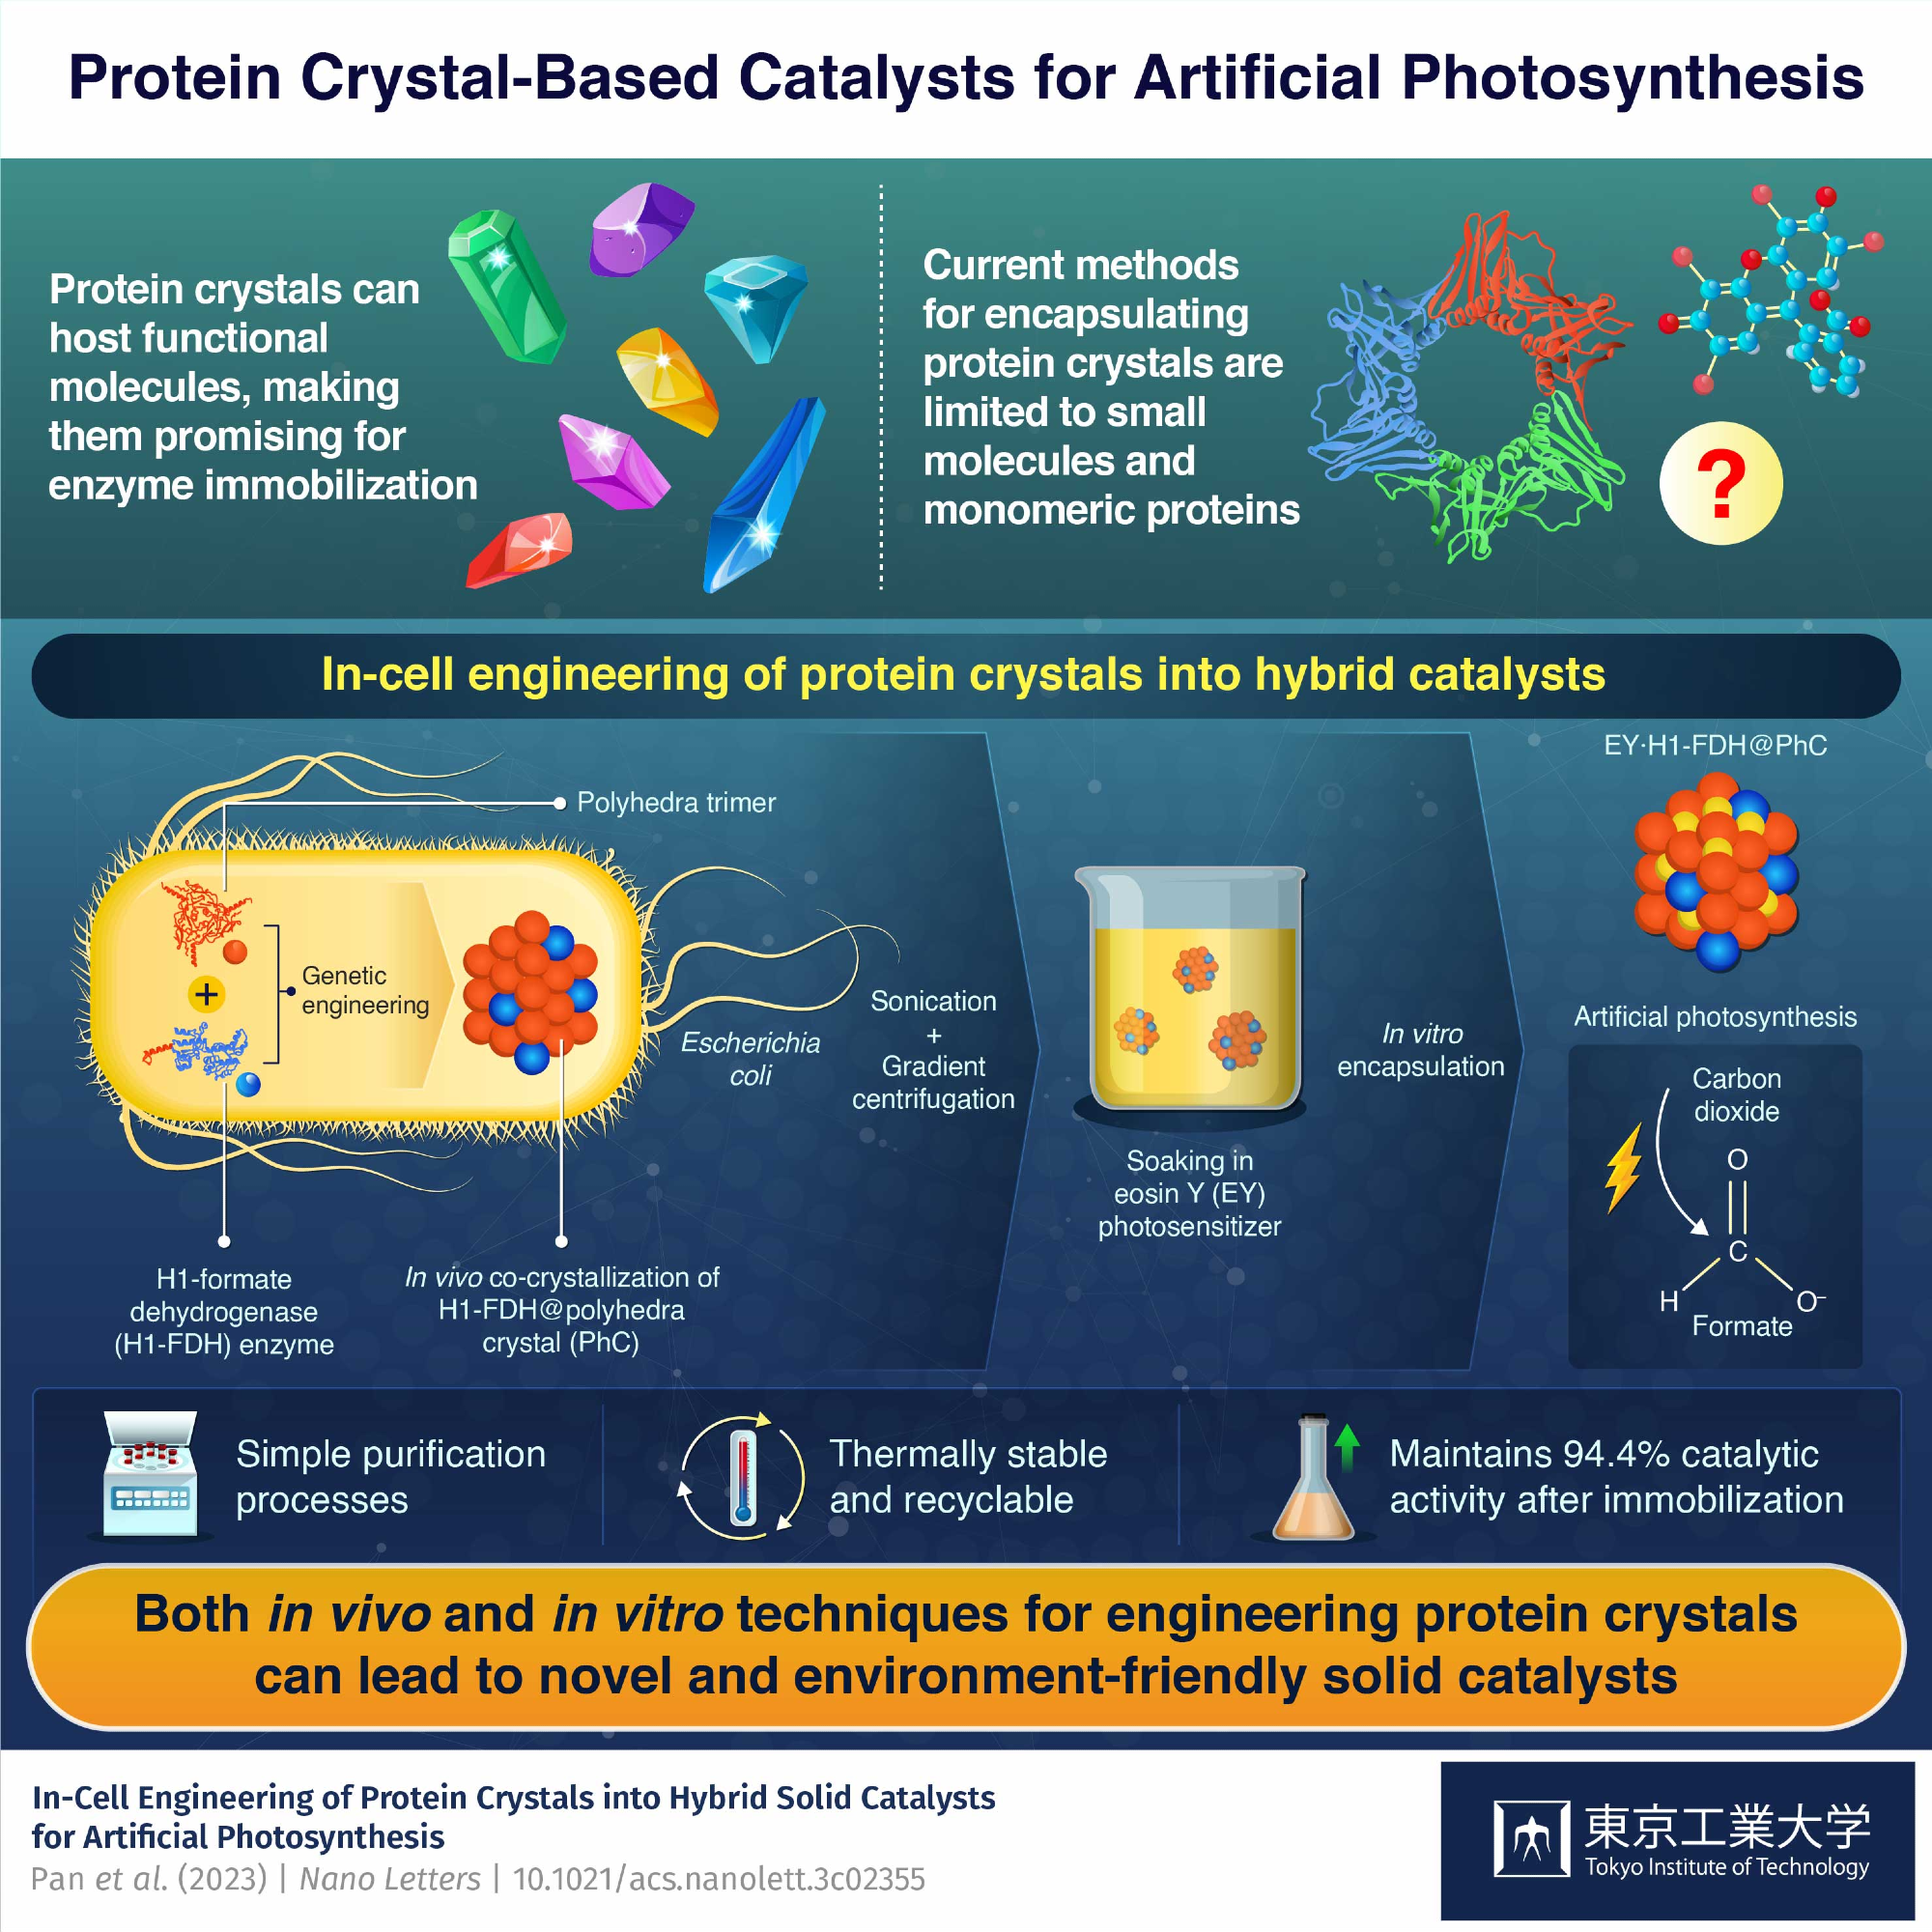 Towards Artificial Photosynthesis with Engineering of Protein Crystals in Bacteria